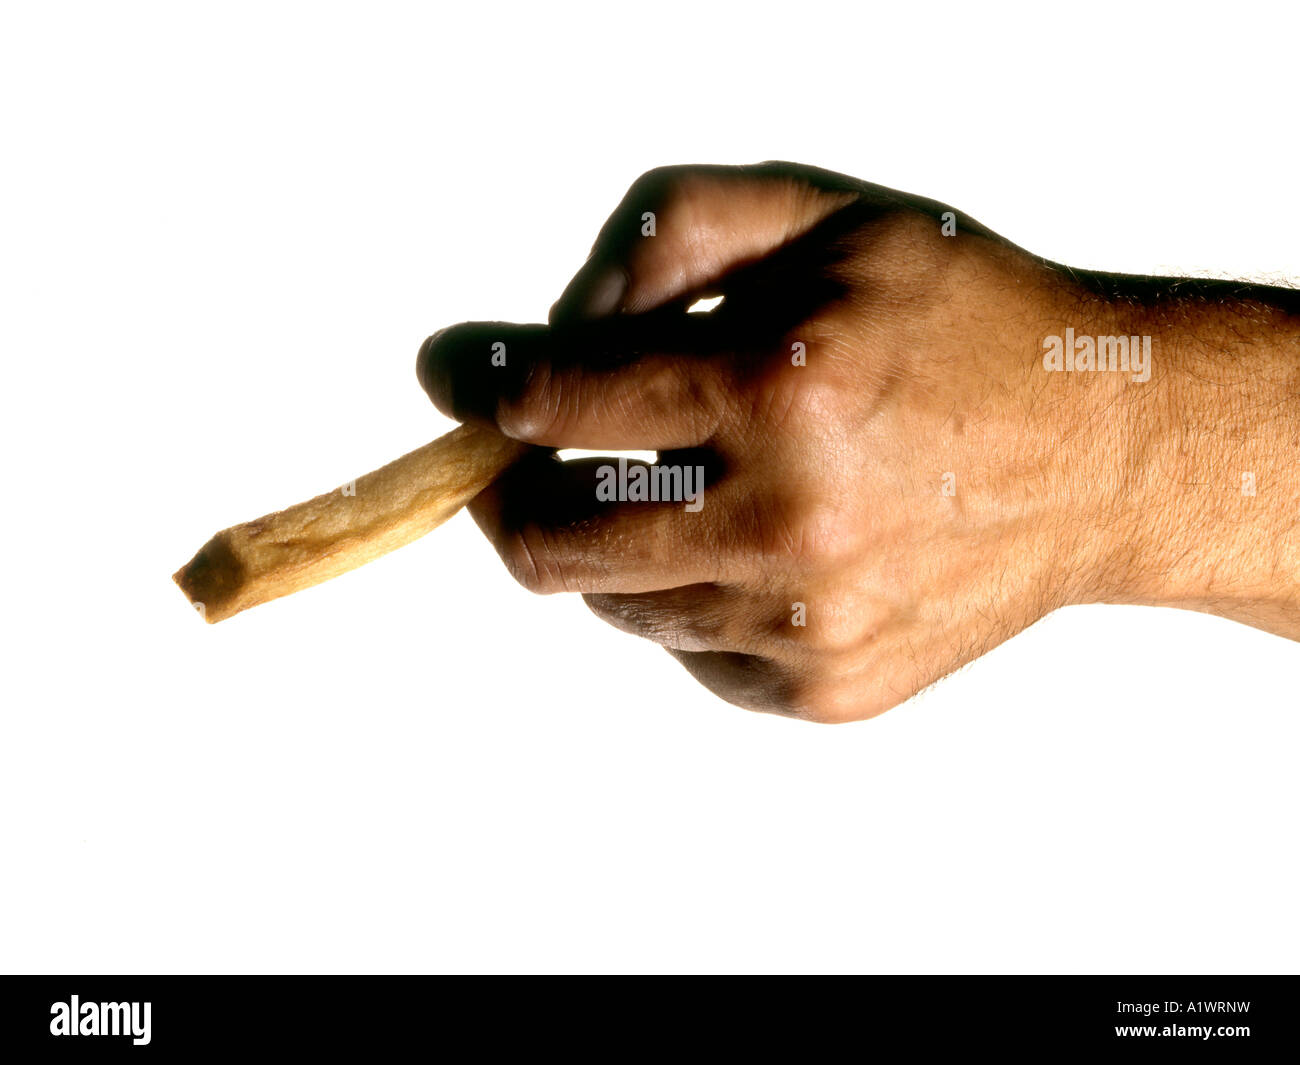 MAN'S HAND HOLDING A CHIP LIKE A CIGARETTE Stock Photo